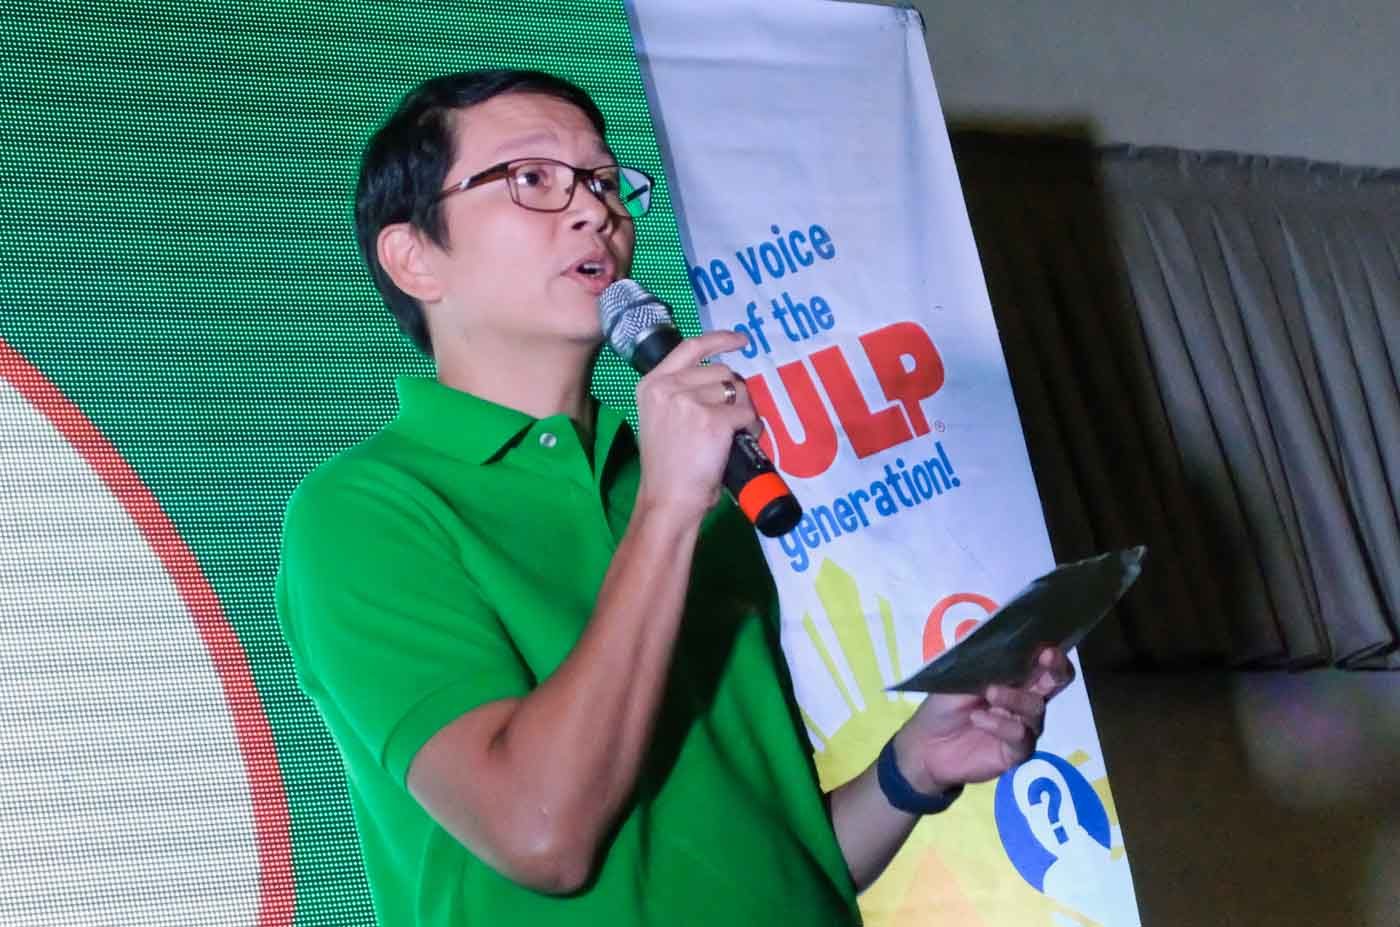 A PROVEN SUCCESS. Emmanuel Lee Esguerra says that following the success of the previous 7-Election, Philippine Seven Corporation is confident that they can make this year’s campaign even more successful thanks to social media